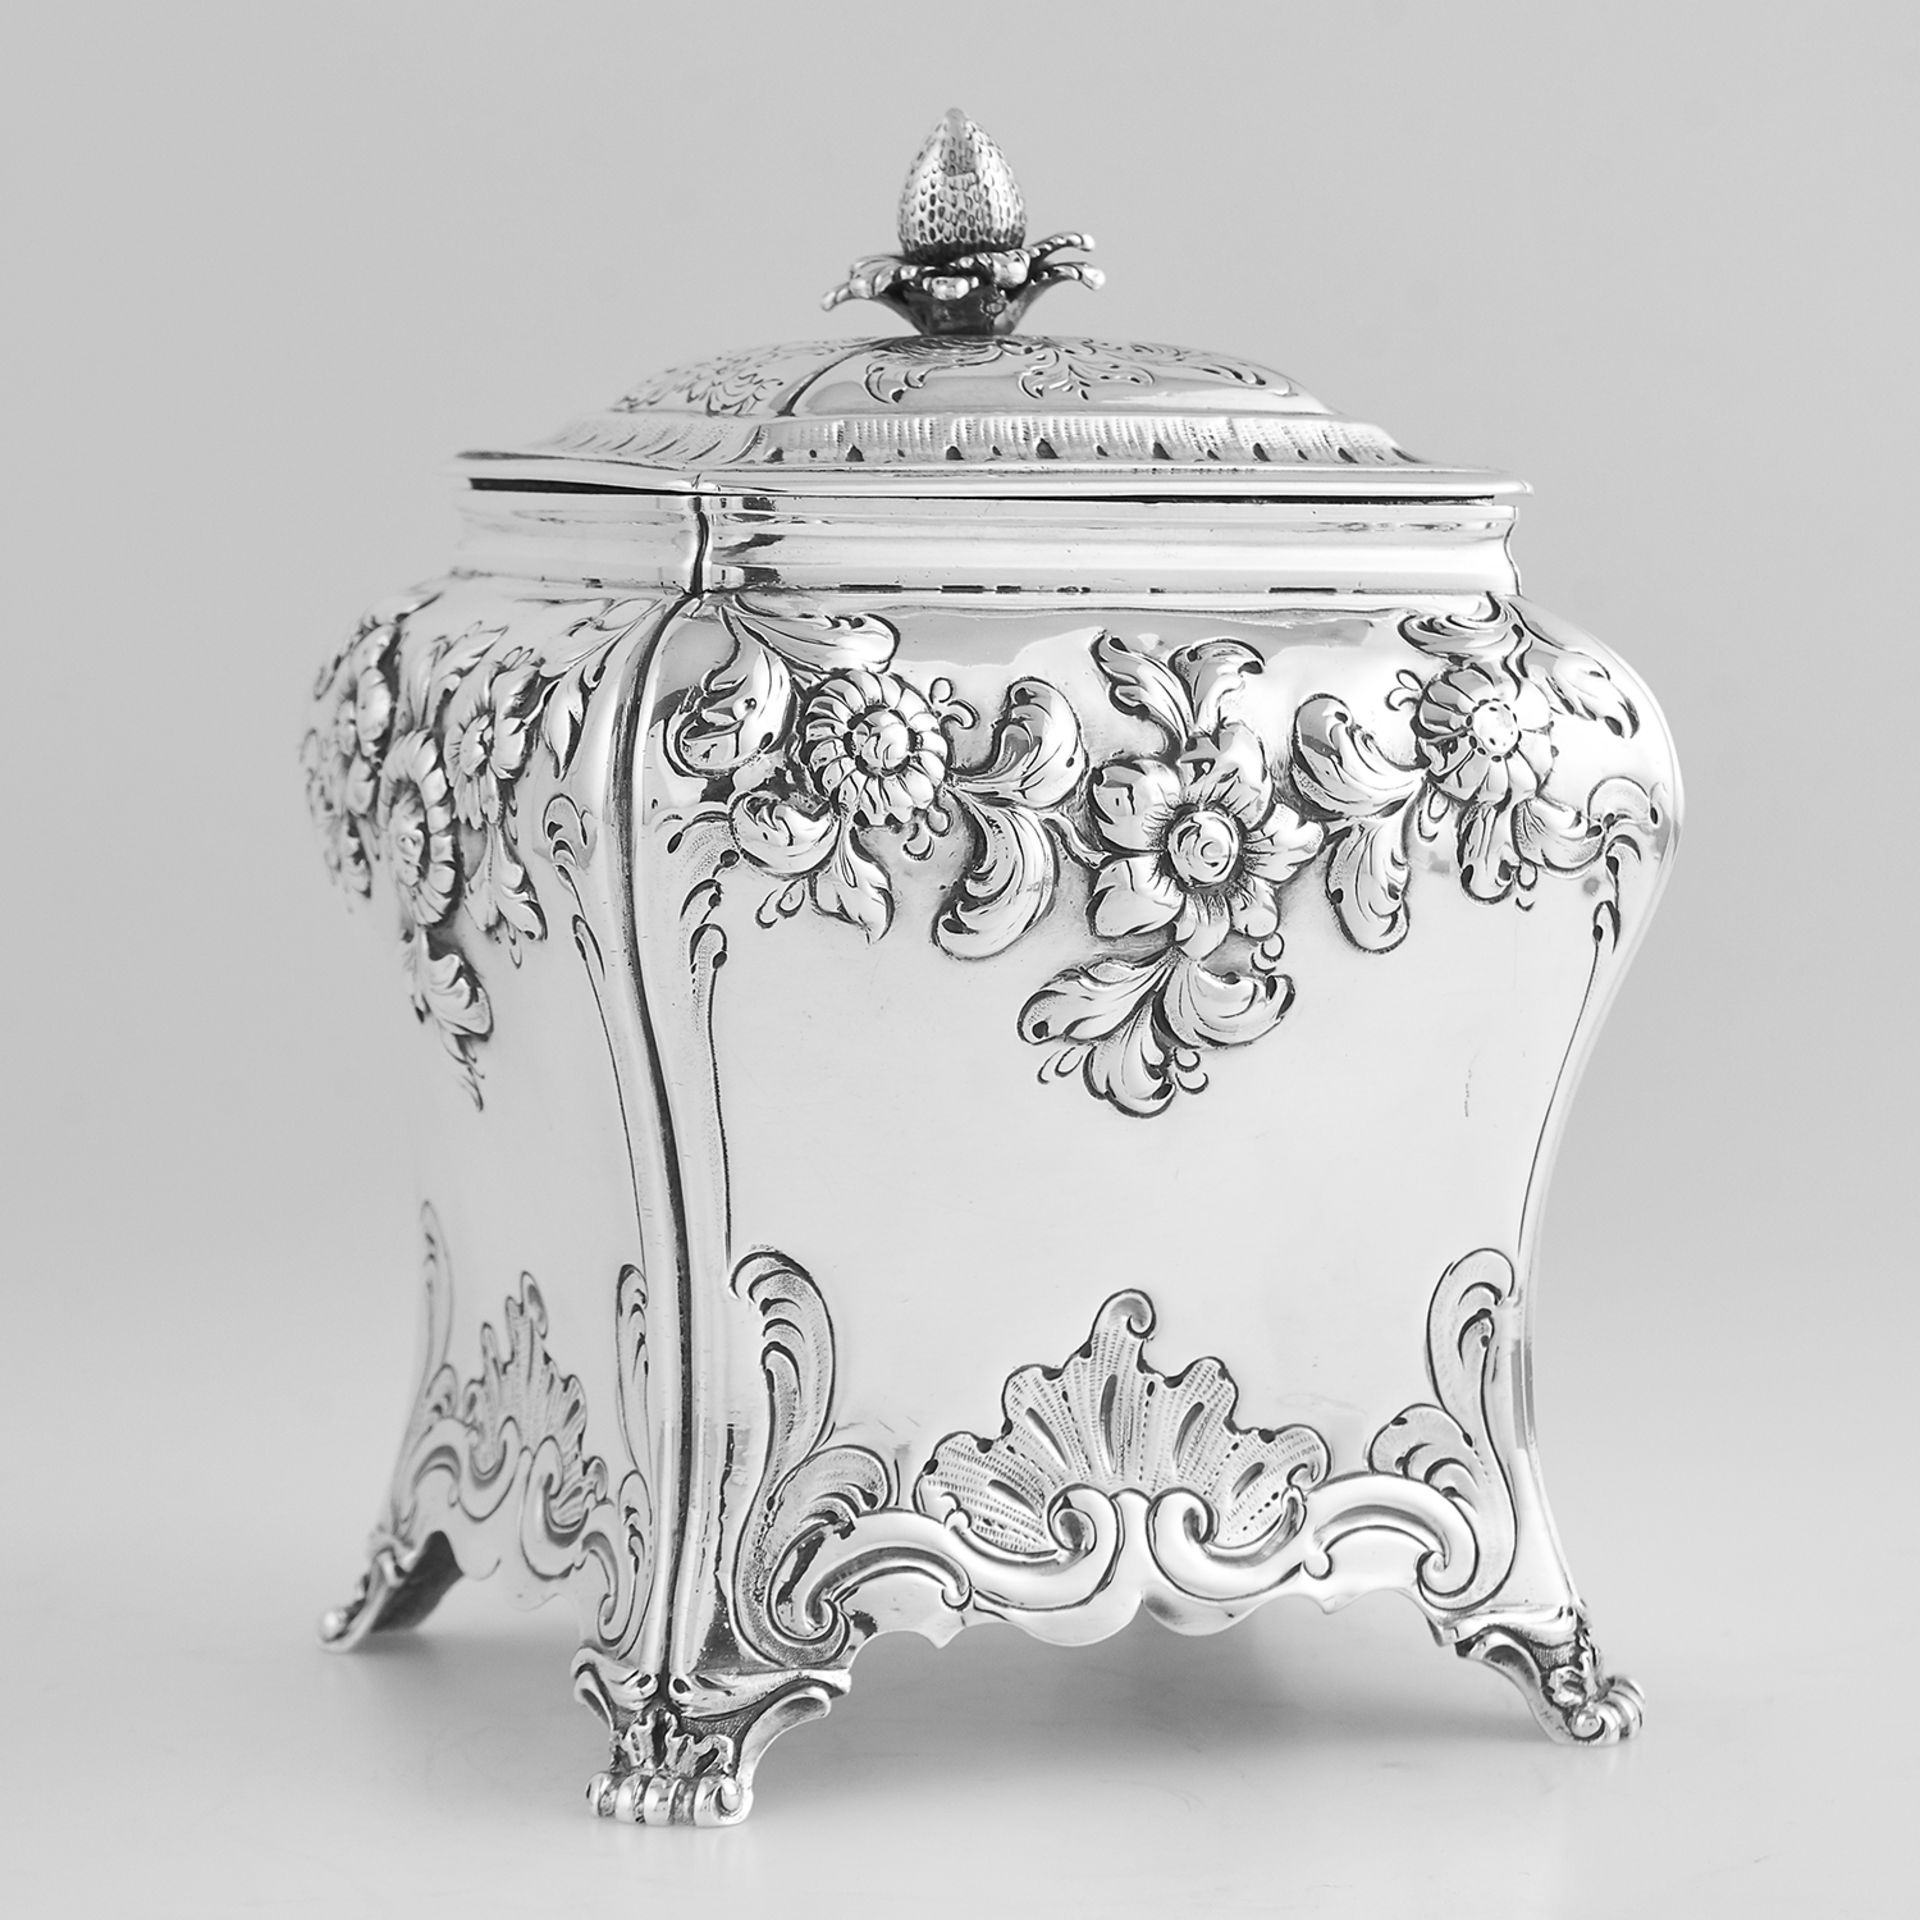 ANTIQUE GEORGE III STERLING SILVER SUGAR BOX, PIERRE GILLOIS LONDON 1761 the bevelled rectangular